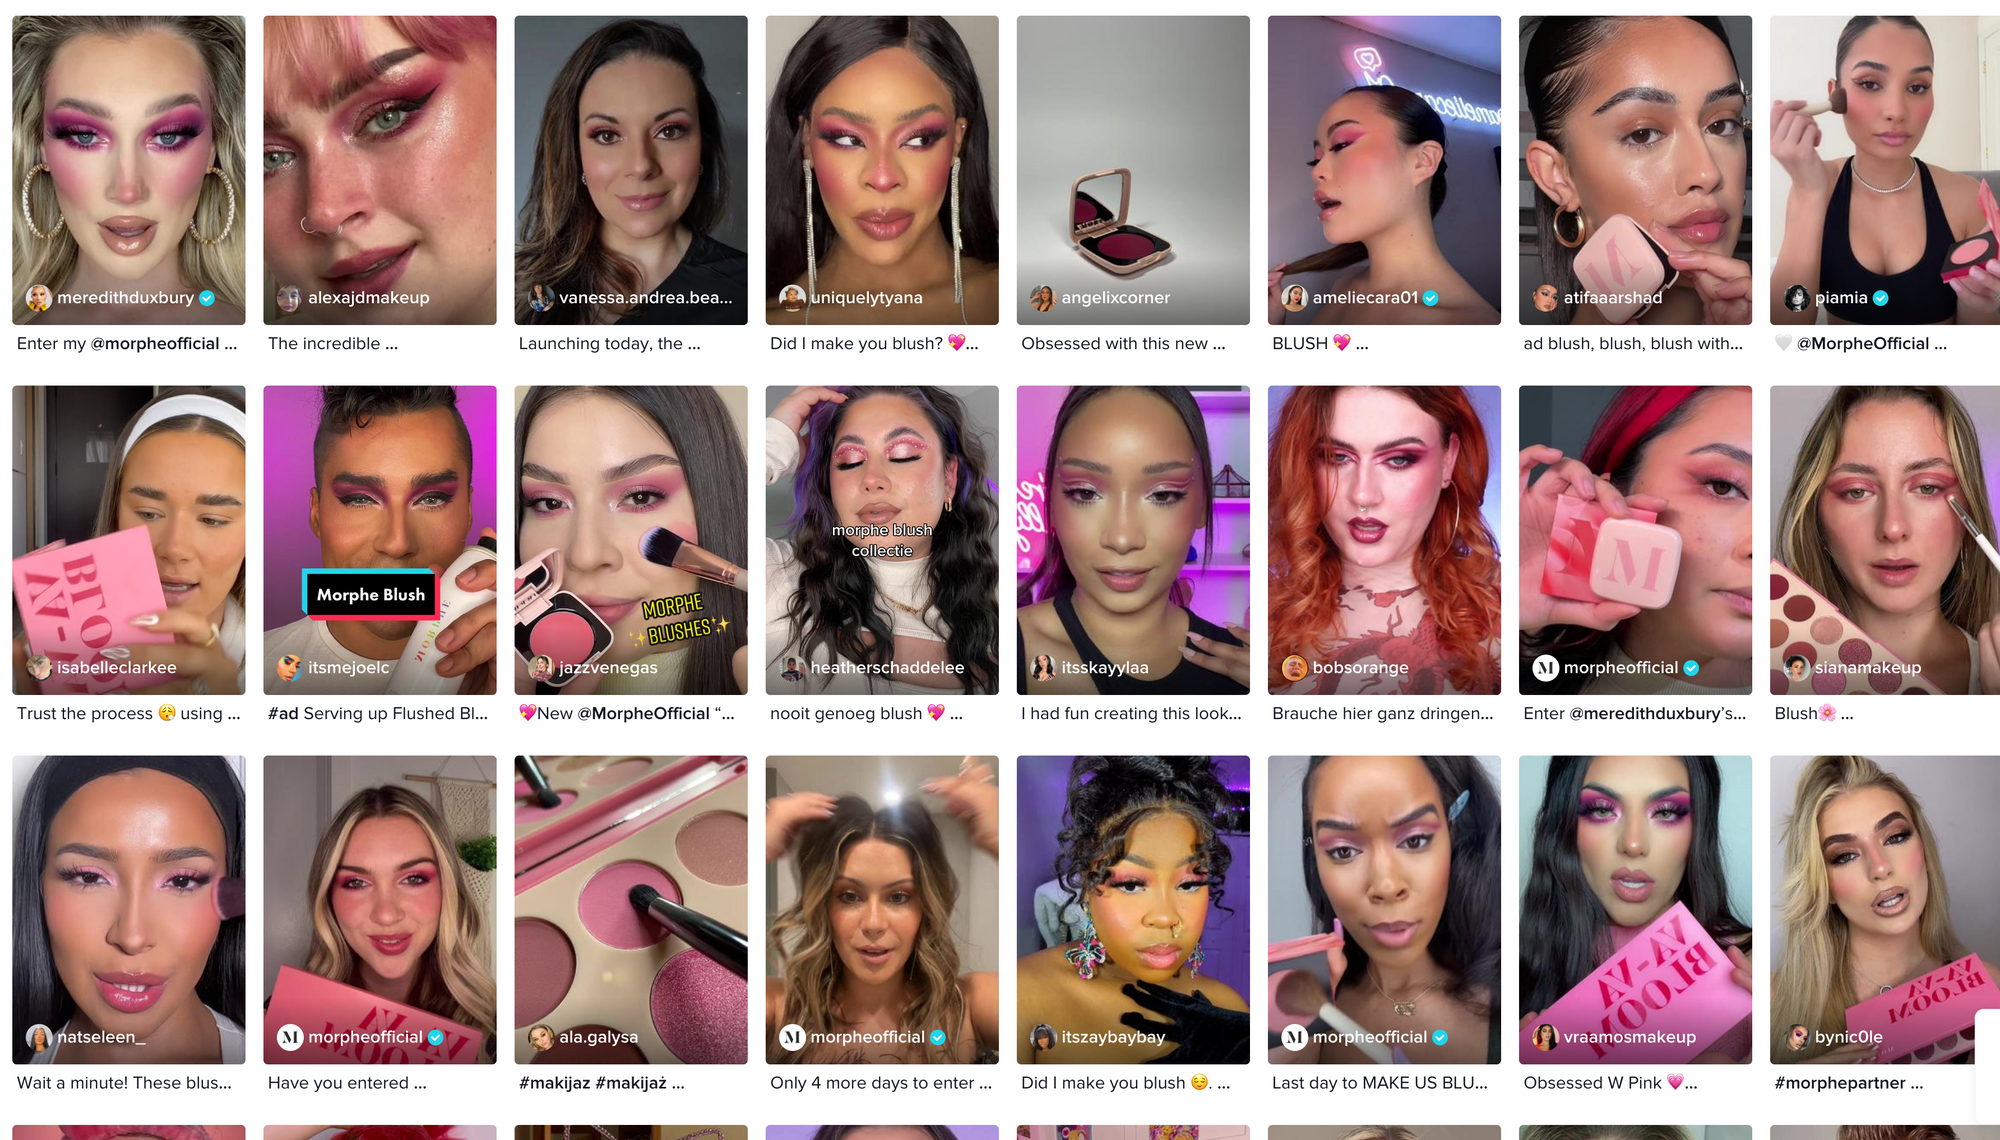 Royalty-Free Music for Beauty Content: Using Music to Boost Reach